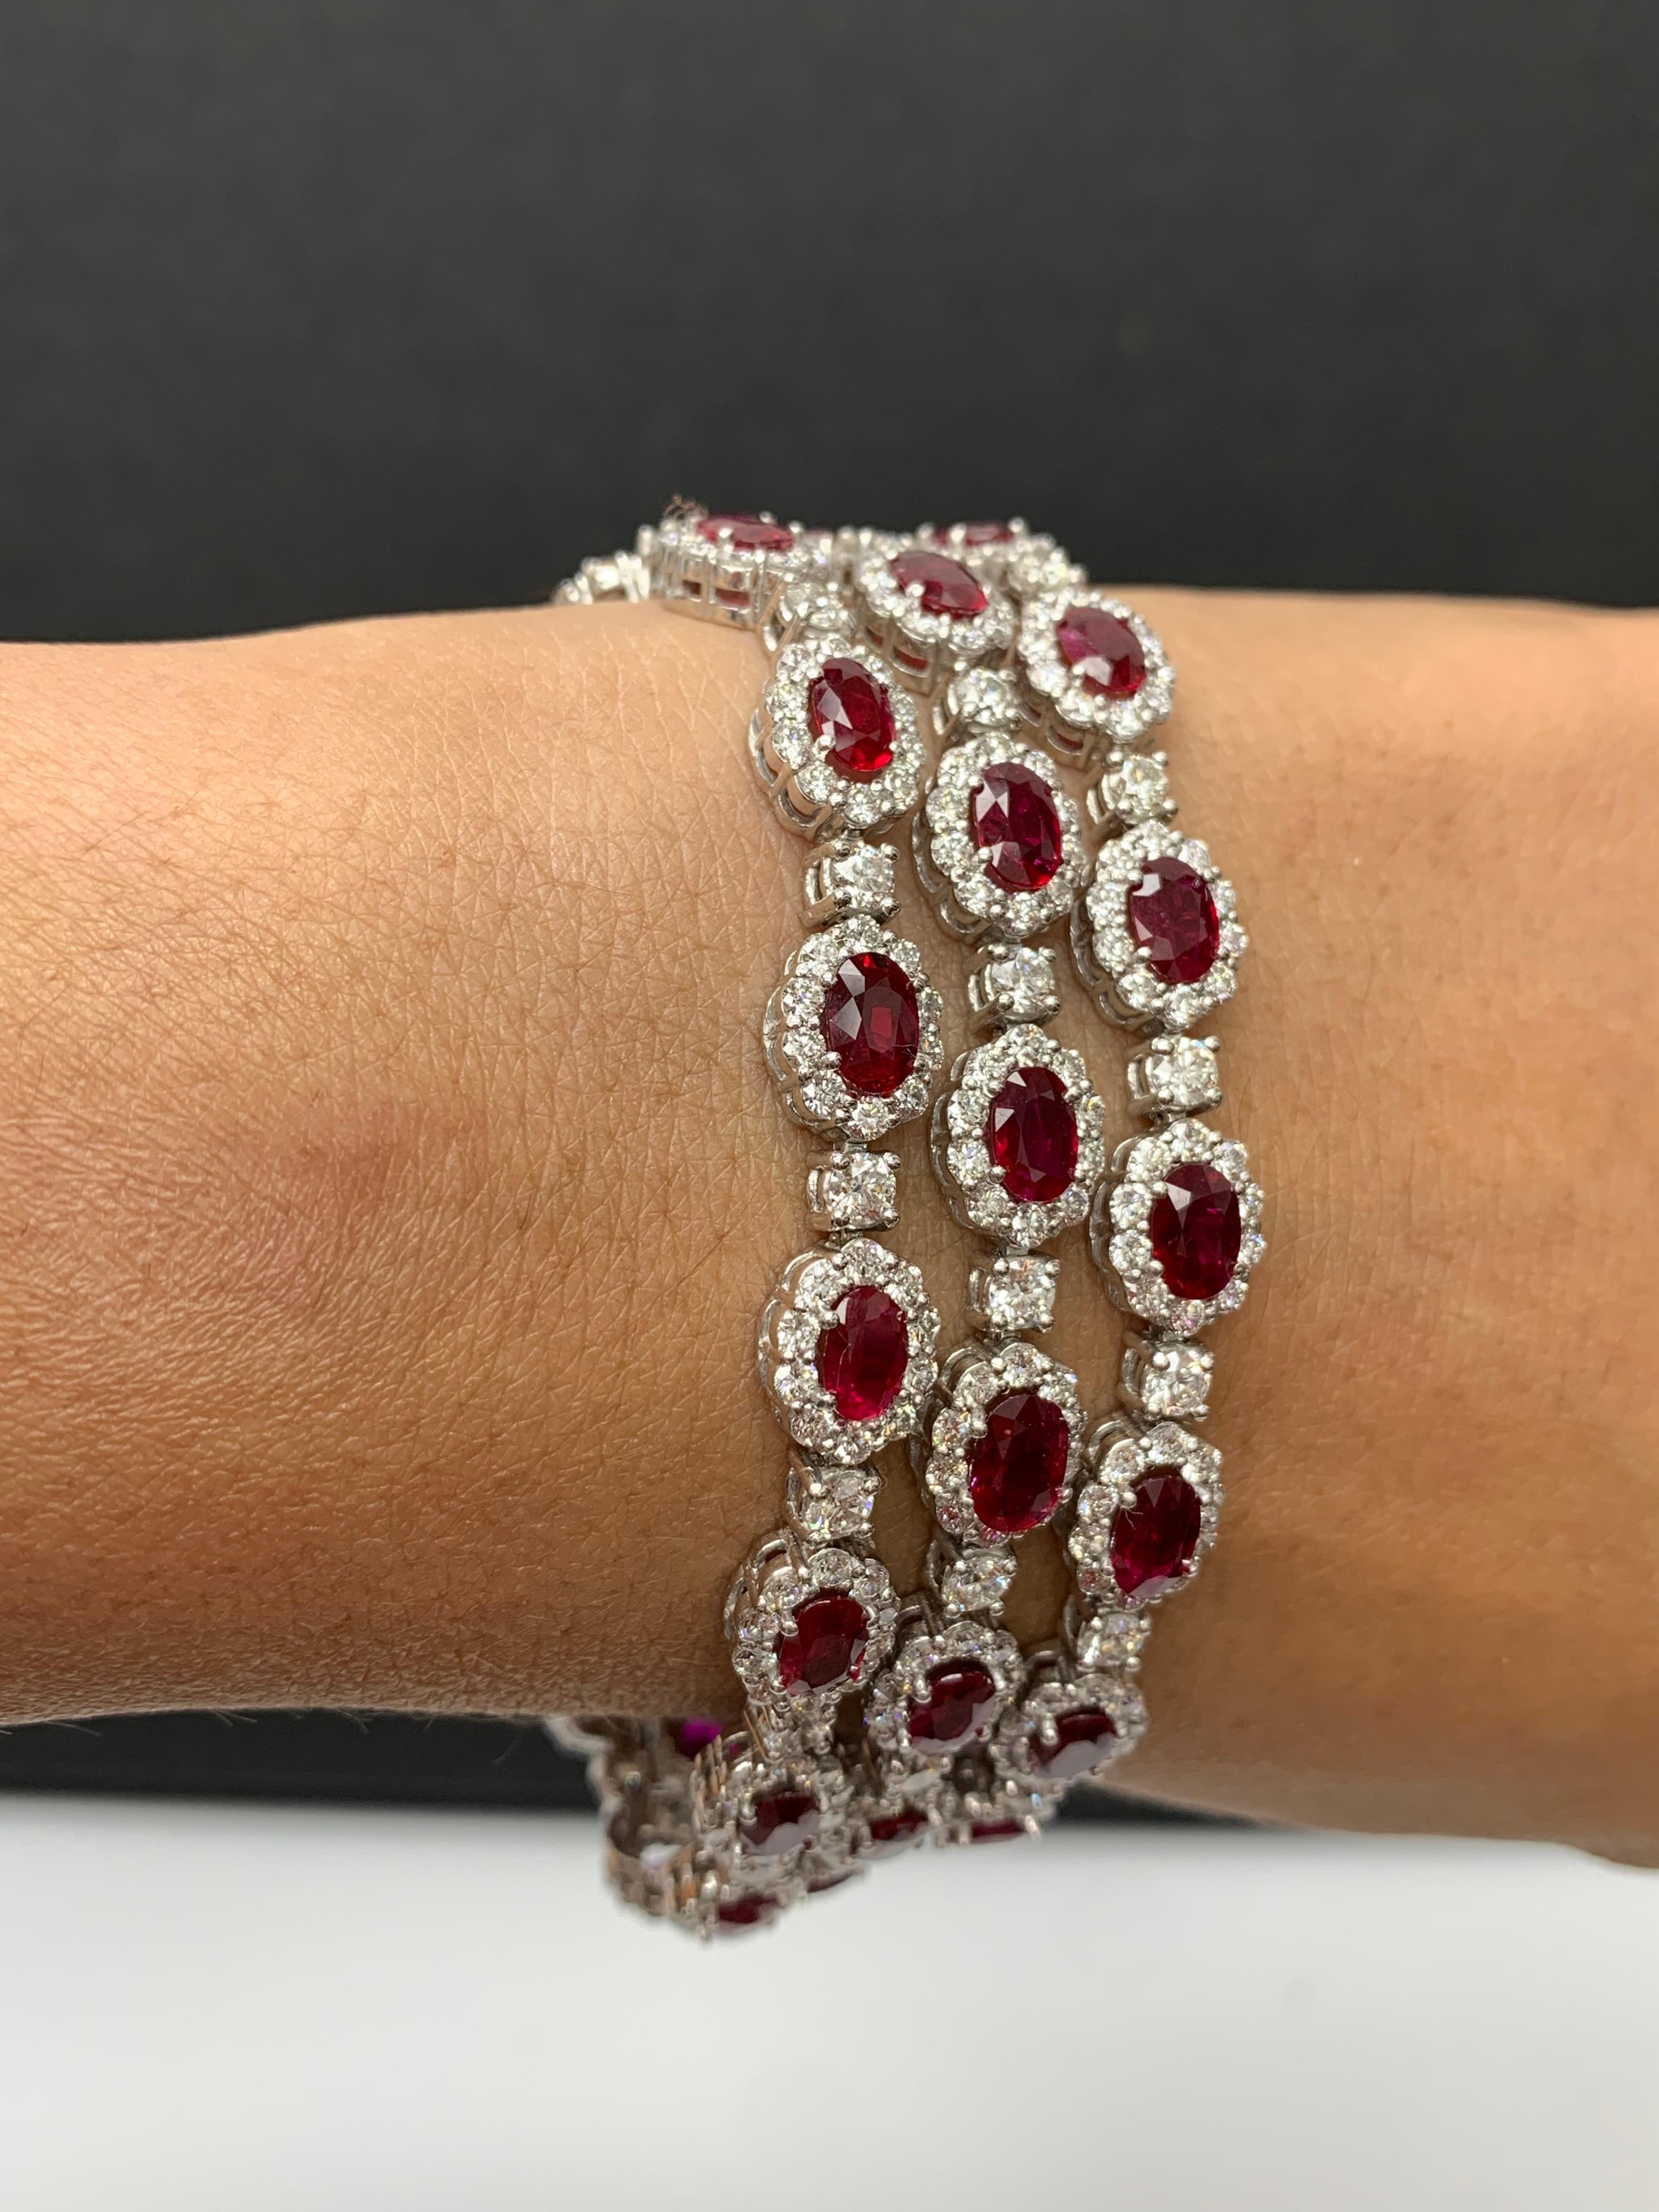 Women's 18.01 Carat Oval Cut Ruby and Diamond 3 Row Bracelet in 14K White Gold For Sale